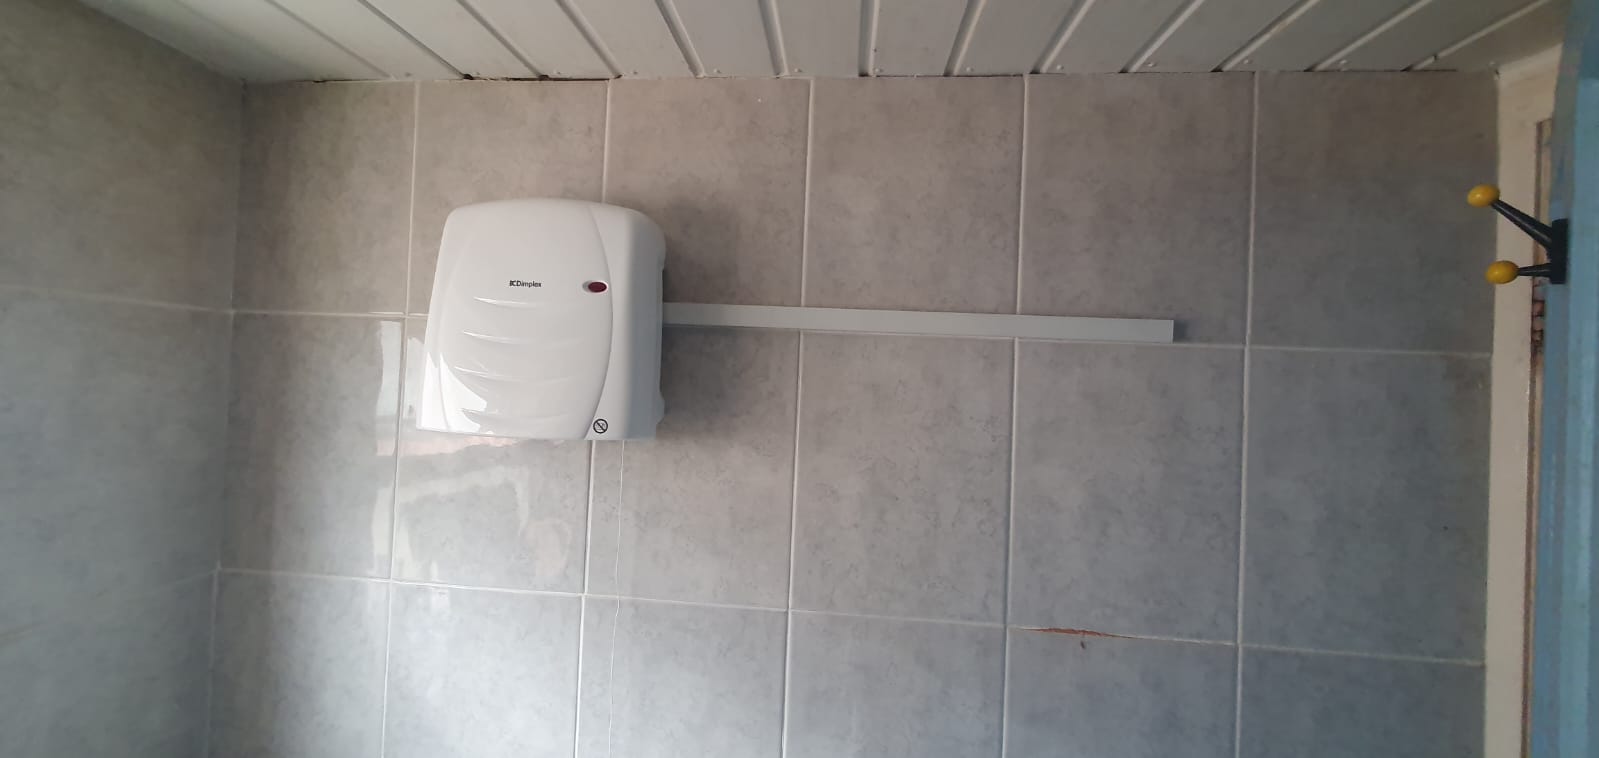 A bathroom wall along with a Fused spur to power bathroom blow heater in Normanton